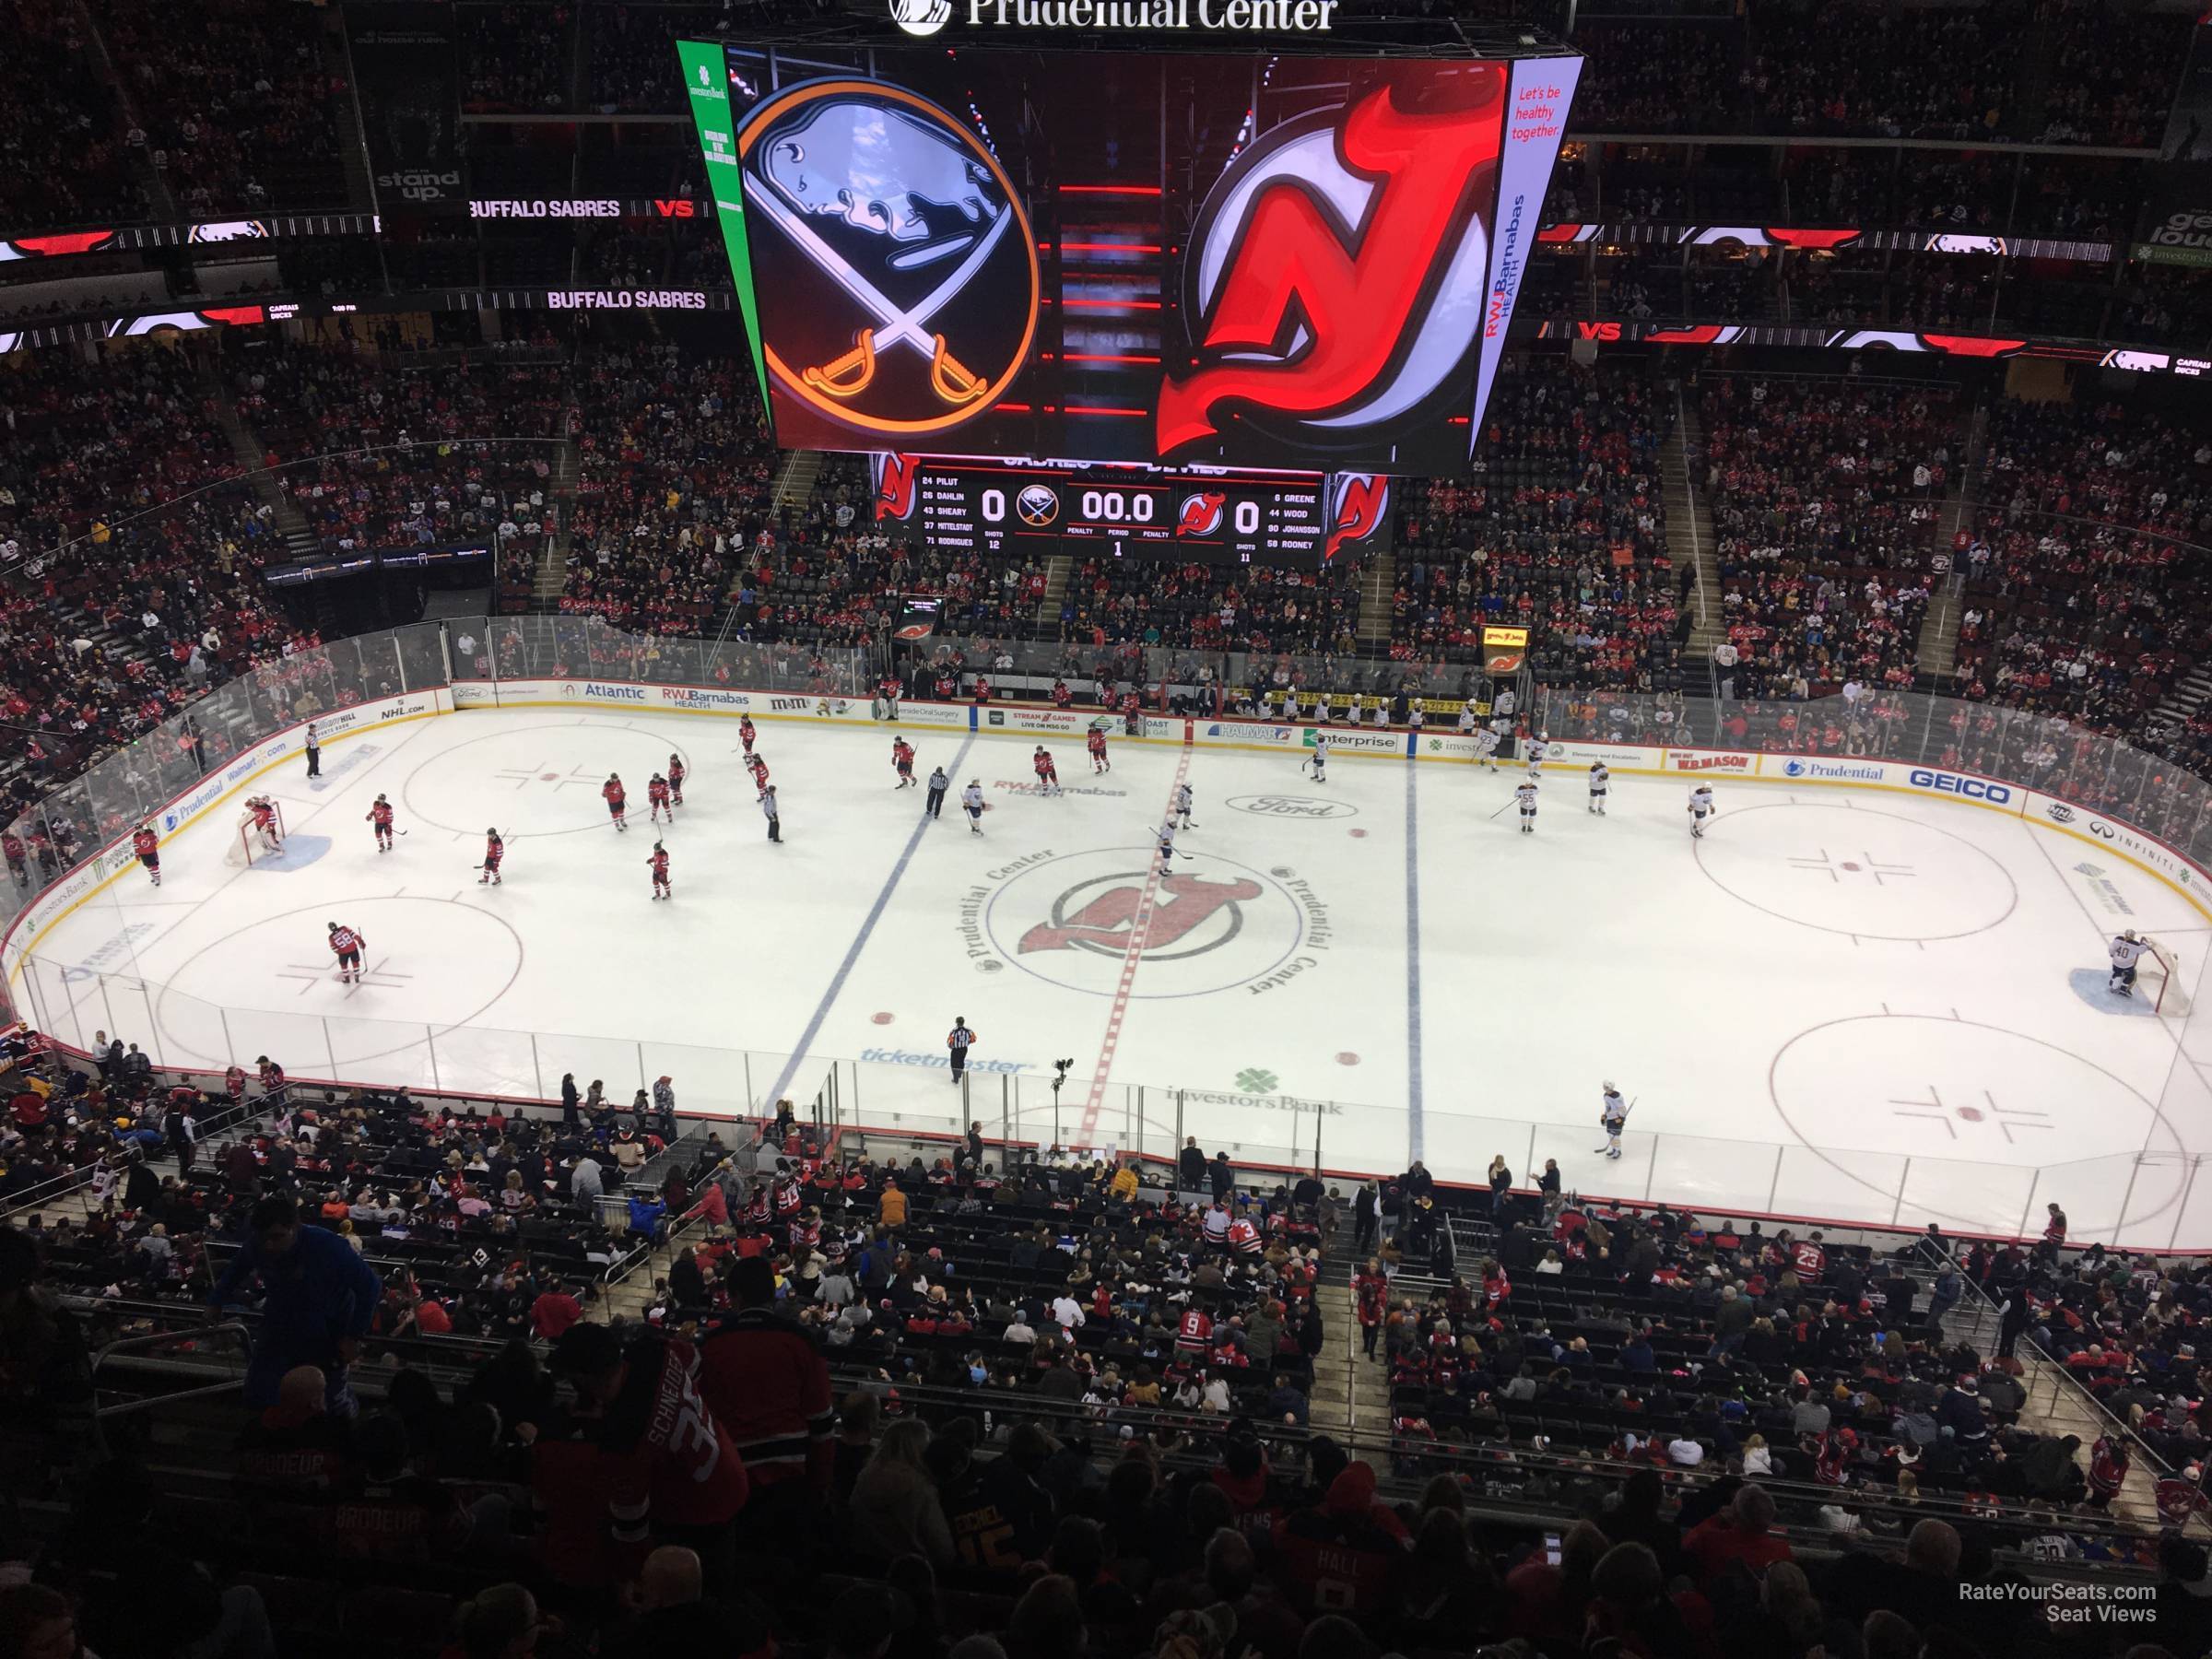 section 230, row 1 seat view  for hockey - prudential center